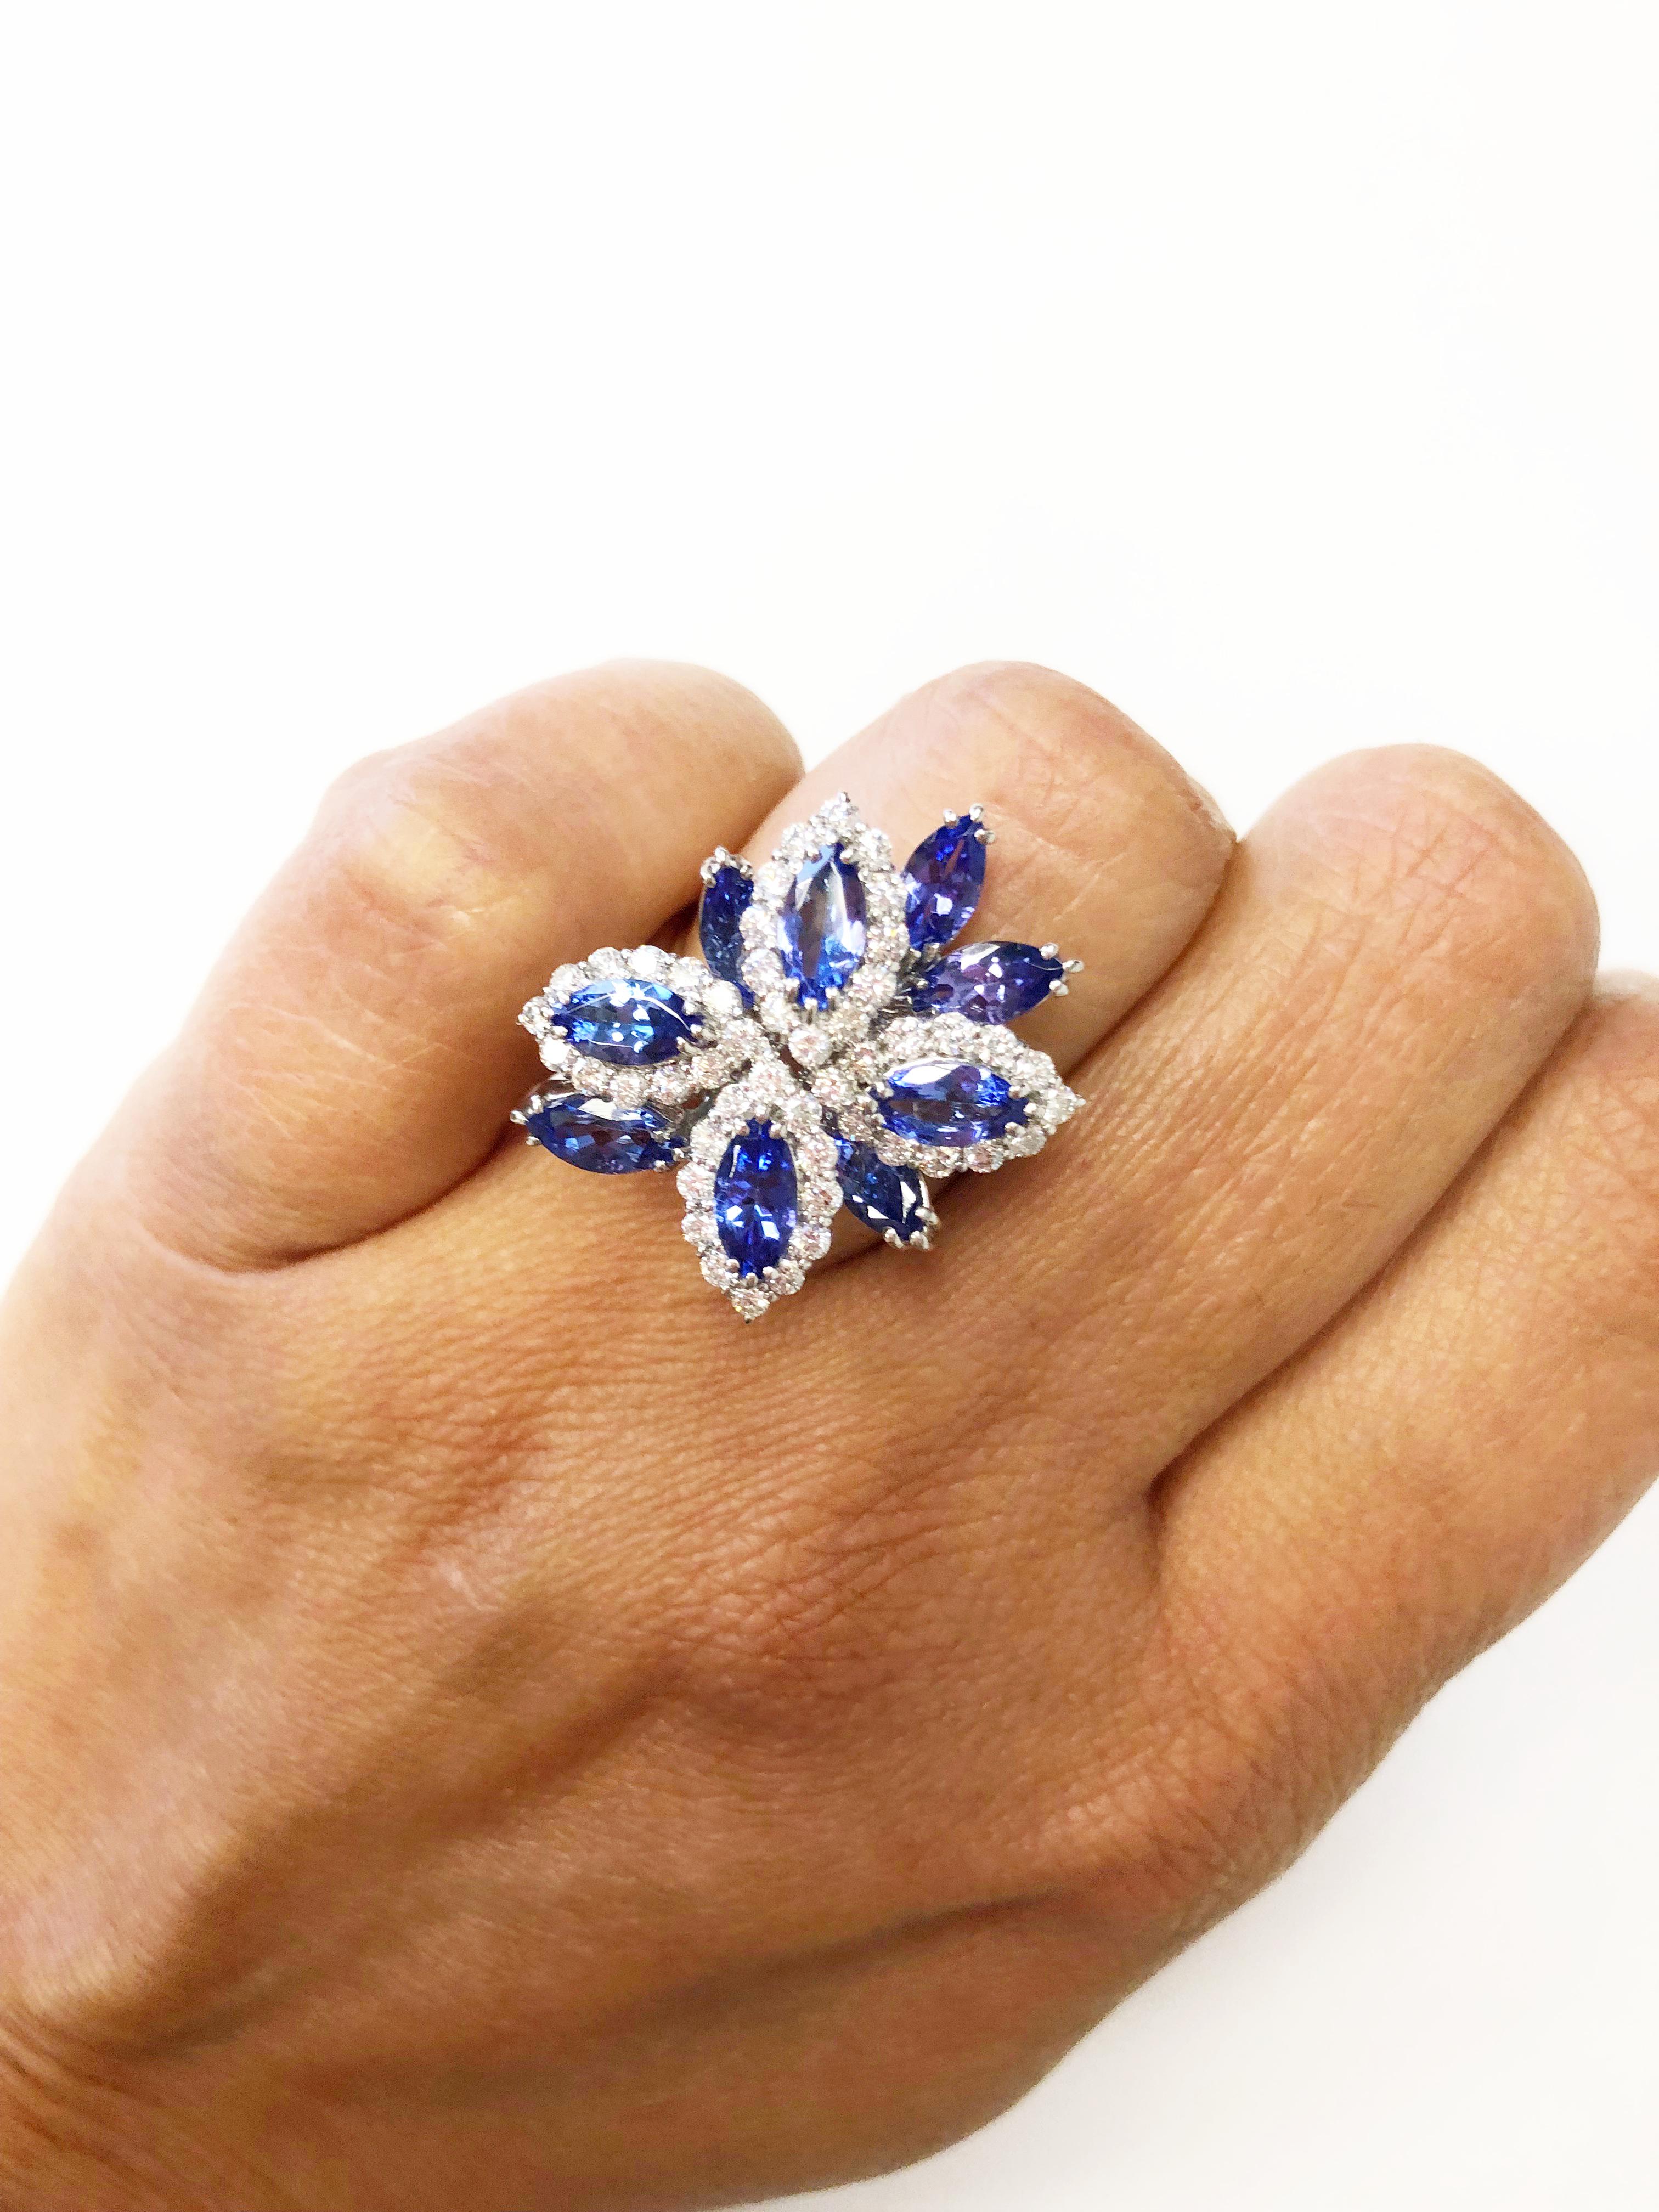 Beautiful tanzanite marquises weighing 3.13 carats, bright and perfect color! Good quality white diamonds weighing 0.90 carats.  Handcrafted platinum ring in size 6.75.  A fun ring that can be worn for any occasion!

